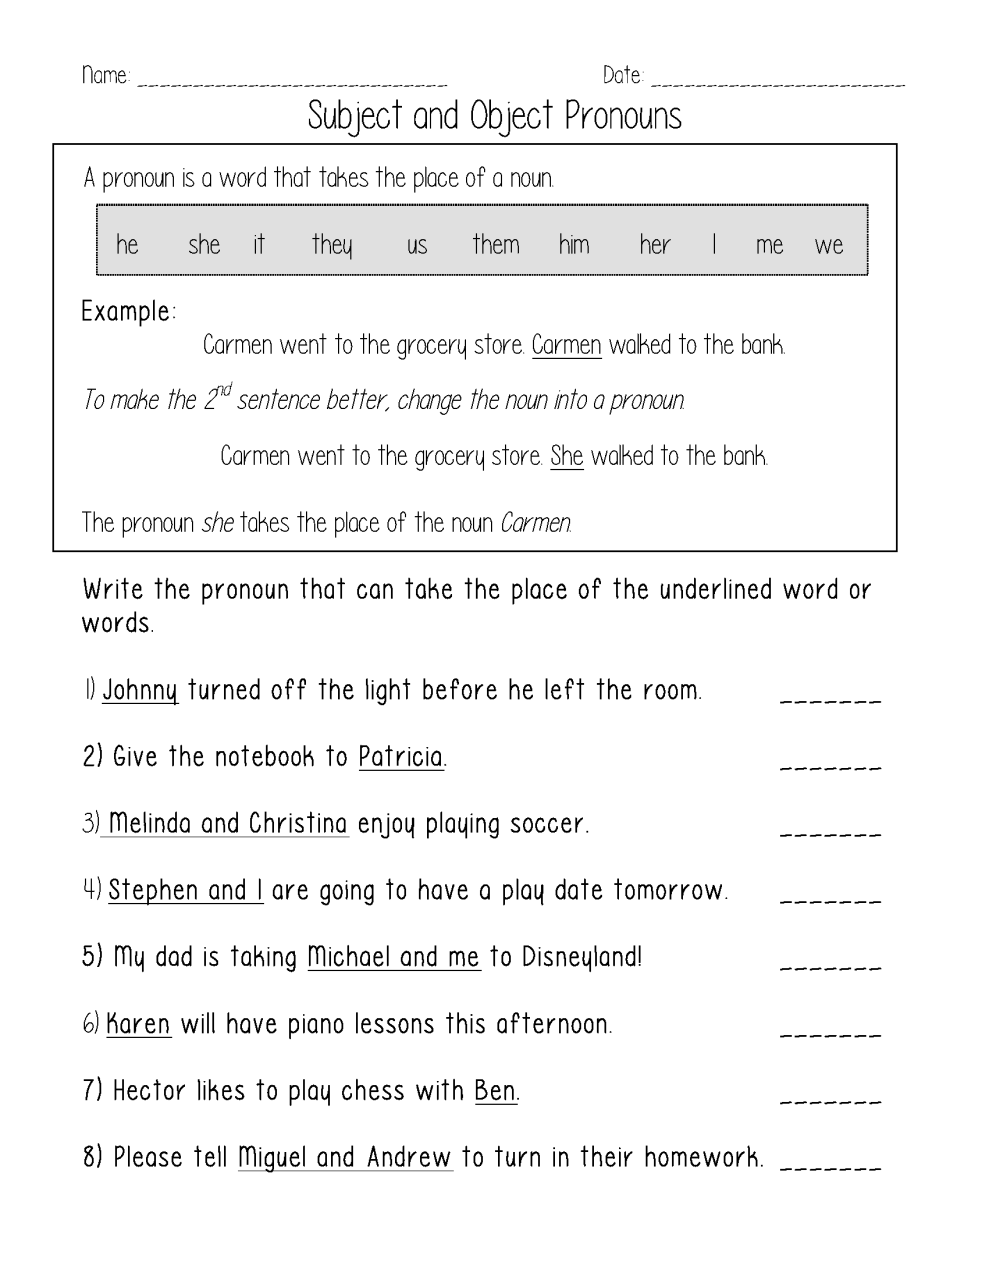 Personal Pronouns Worksheets For Grade 2